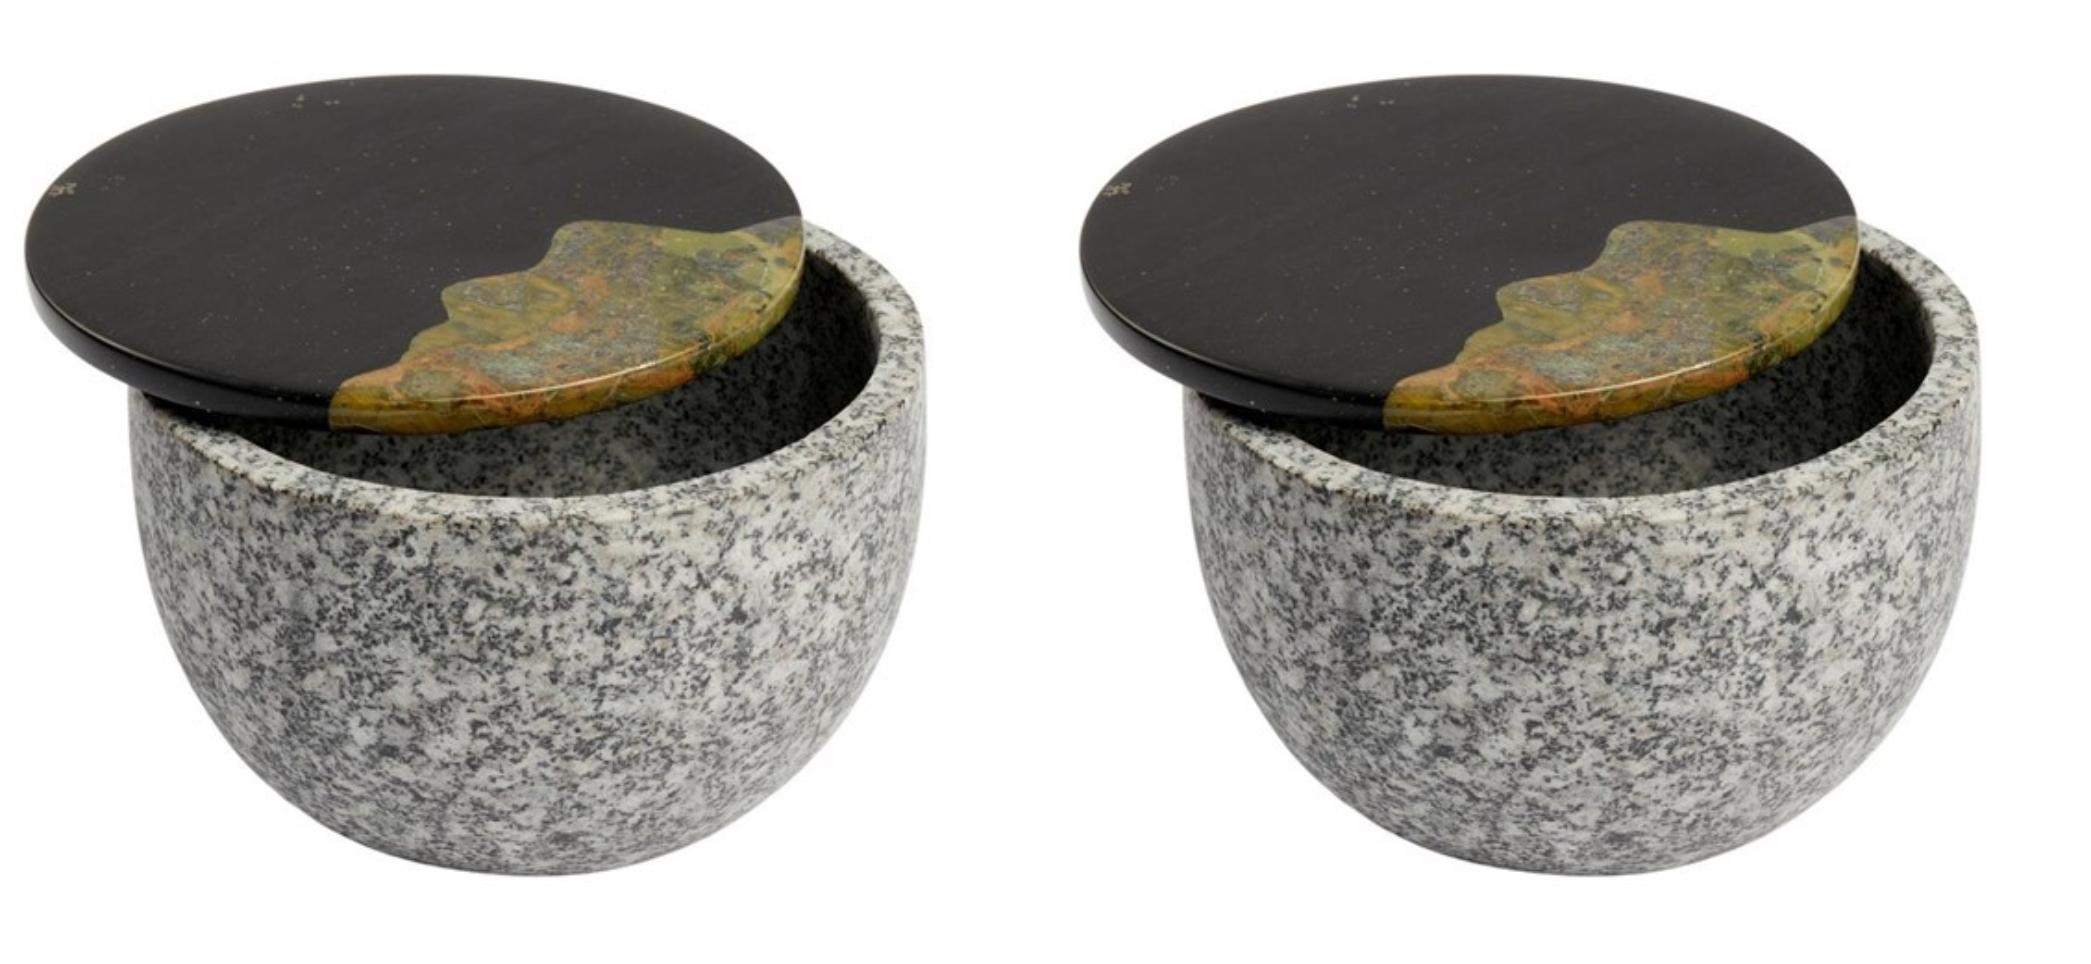 Set of 2 sprouter pot by Estudio Rafael Freyre
Dimensions: D 15 x H 8 cm 
Materials: Andes stone, Amazonic wood.
Also Available: Other materials and finishes available,

The Sprouters series explores the interaction of mineral and plant